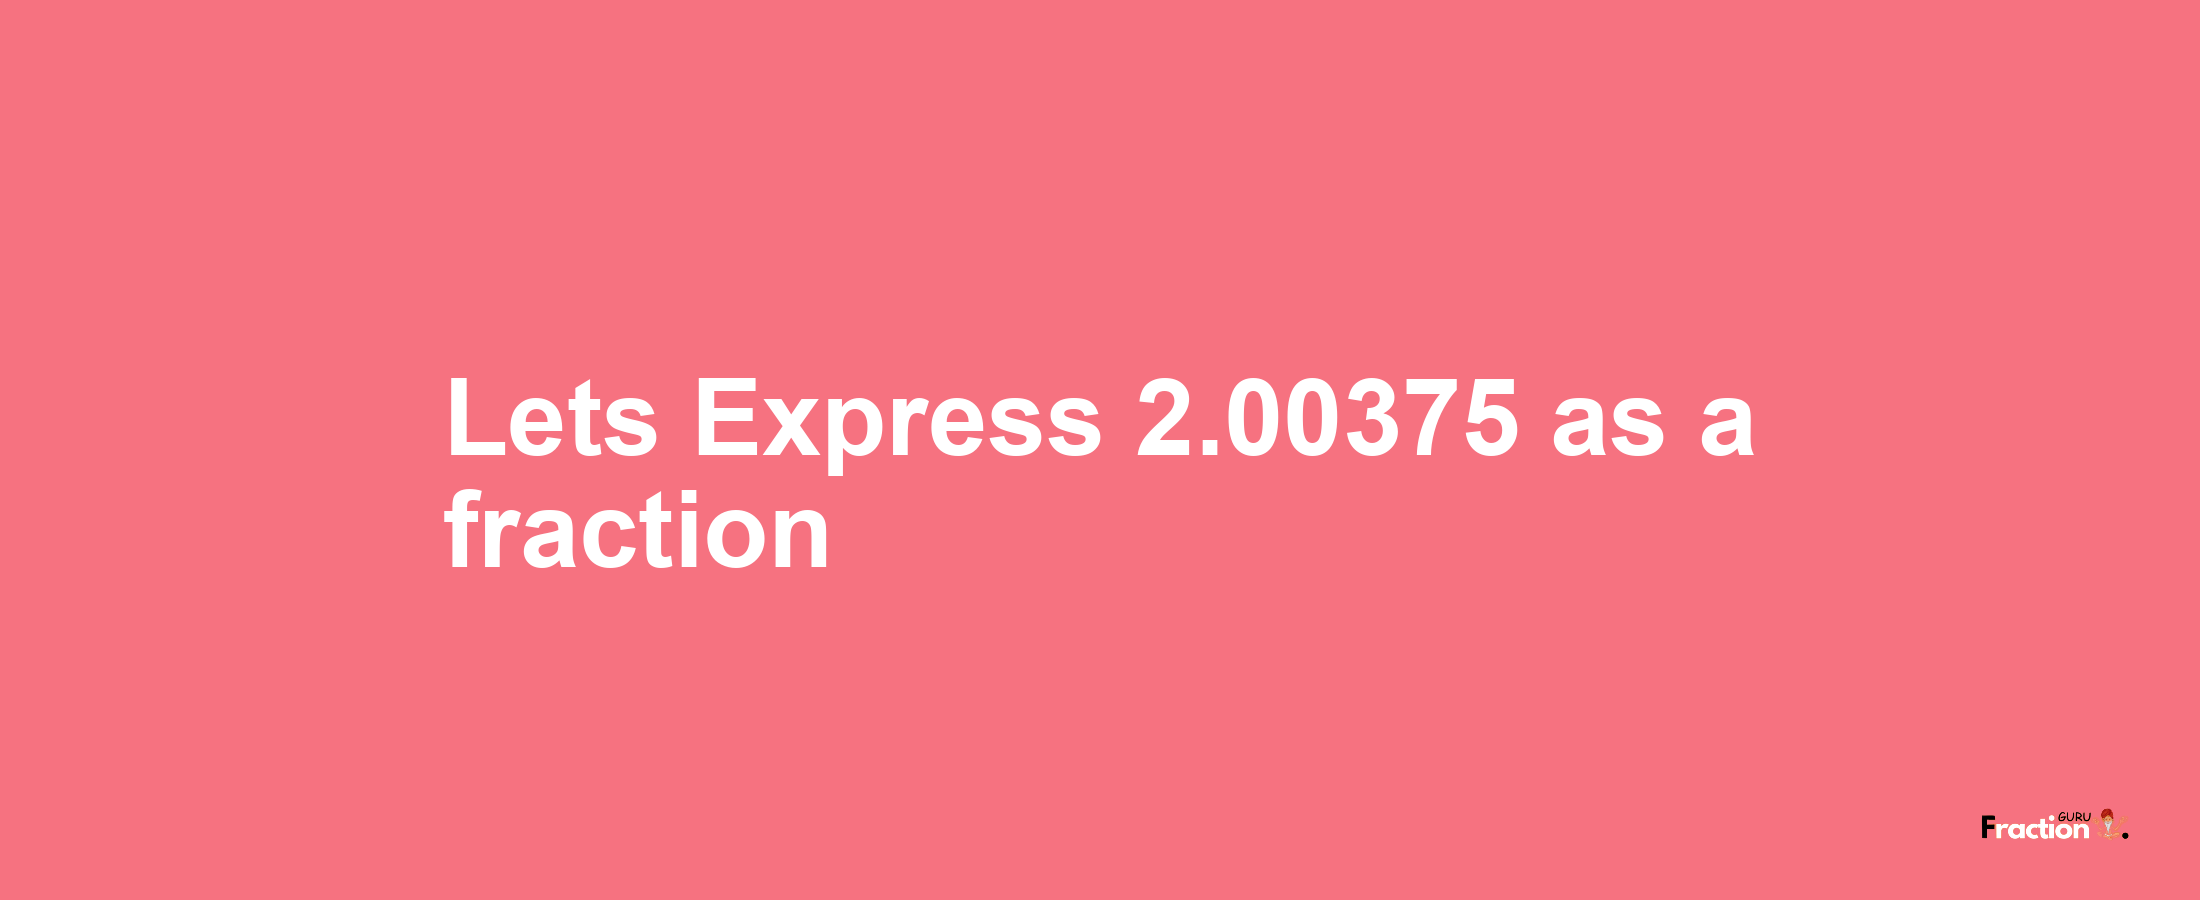 Lets Express 2.00375 as afraction